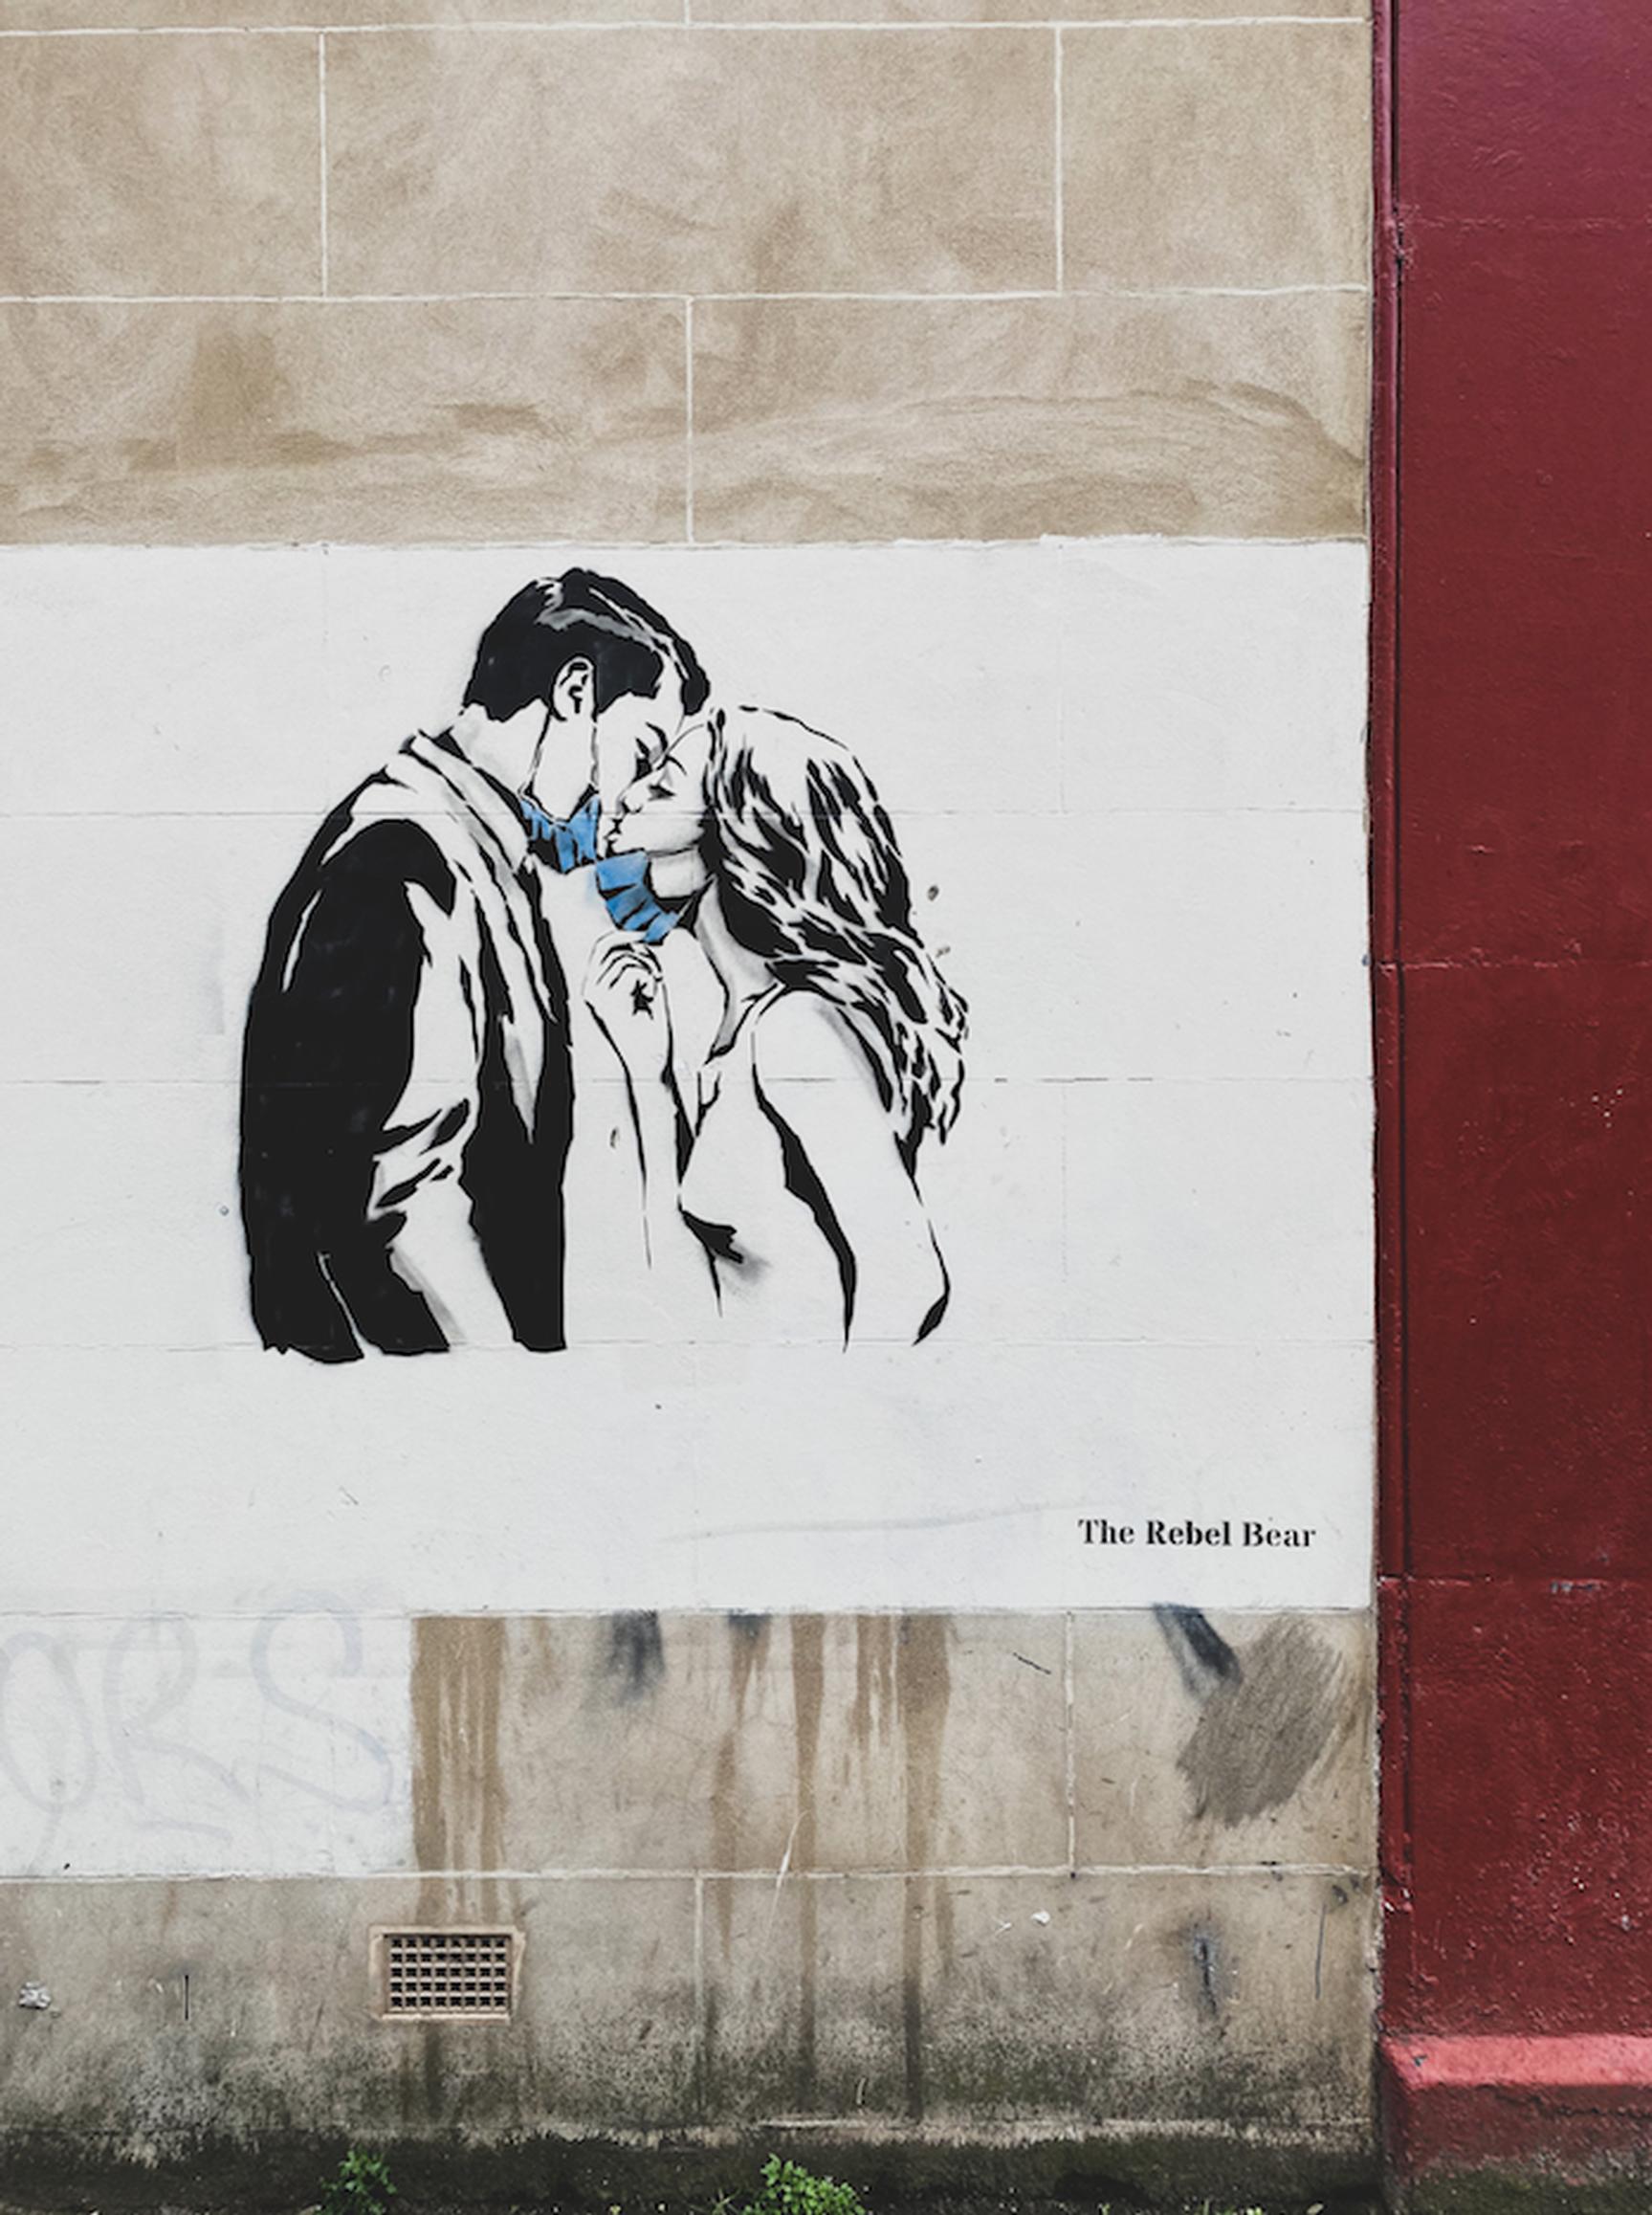 Pandemic artwork in Glasgow by Rebel Bear photographed by Crawford Jolly (Unsplash)